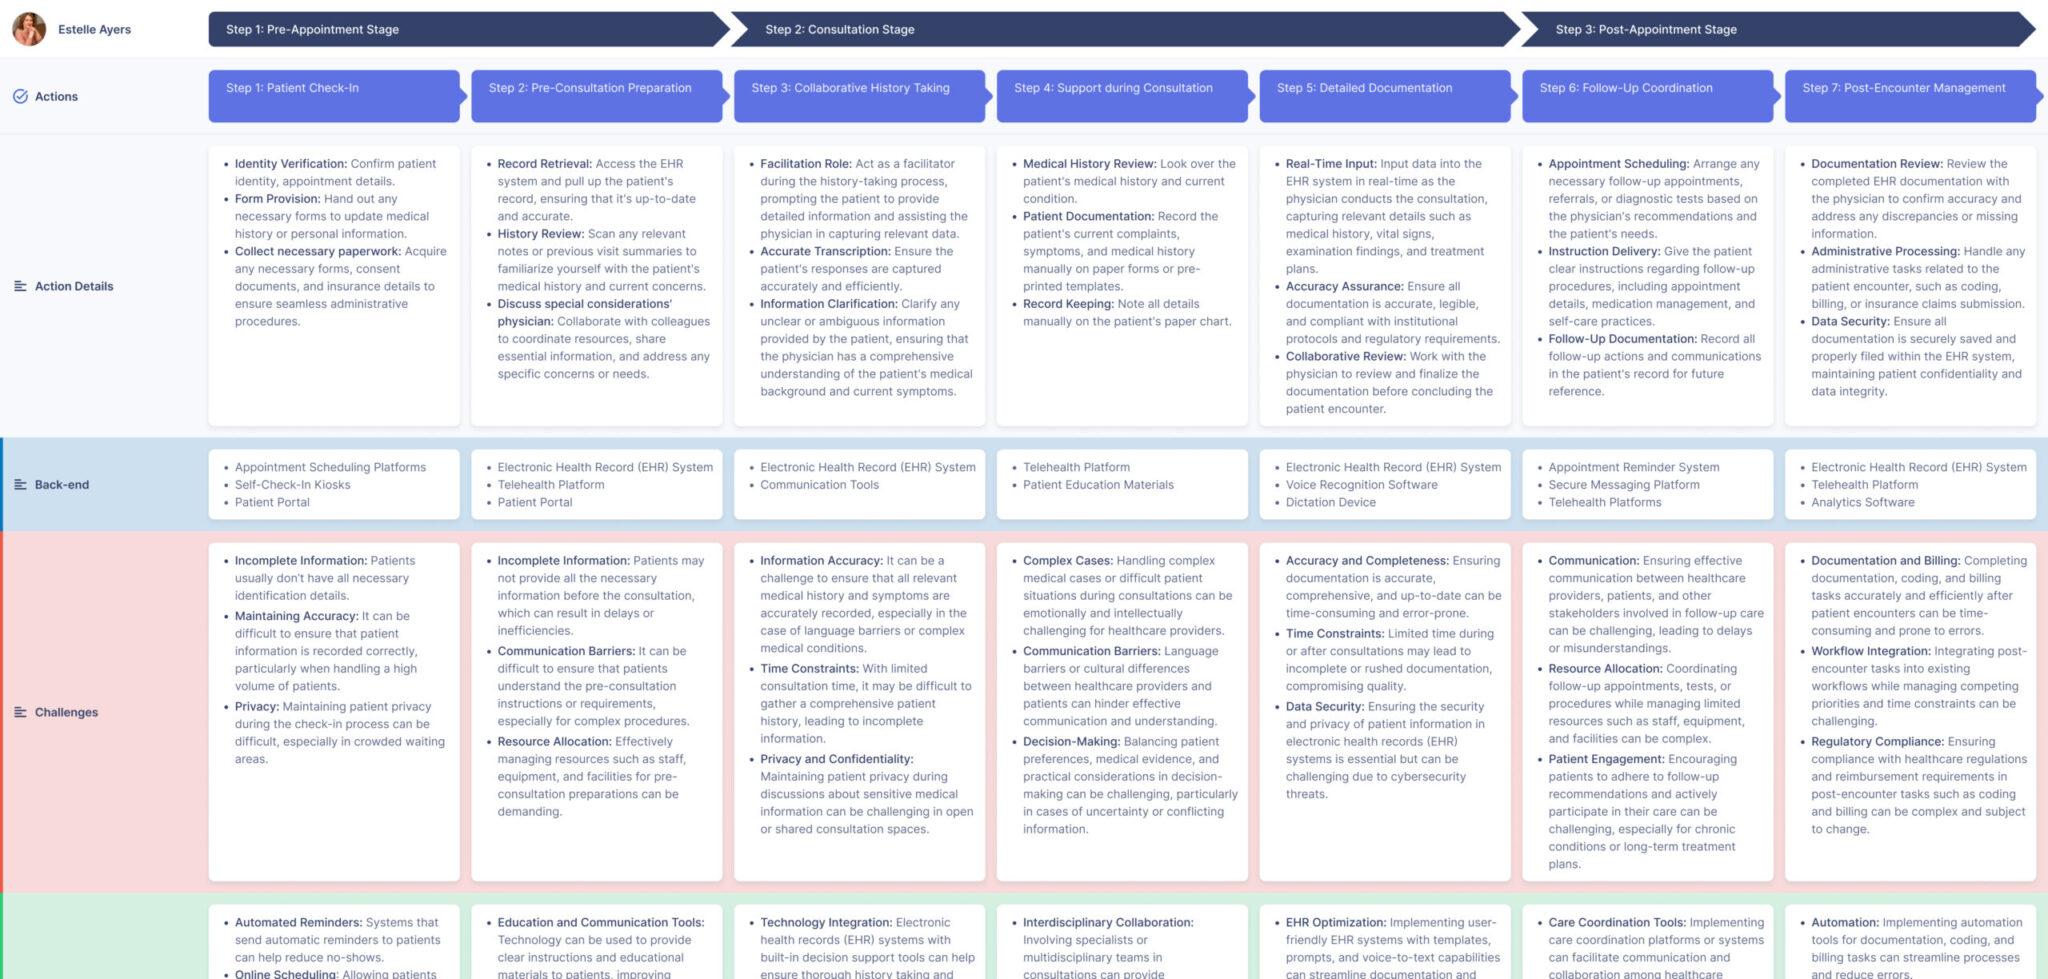 User journey map depicting the actions and challenges from pre-appointment to post-appointment